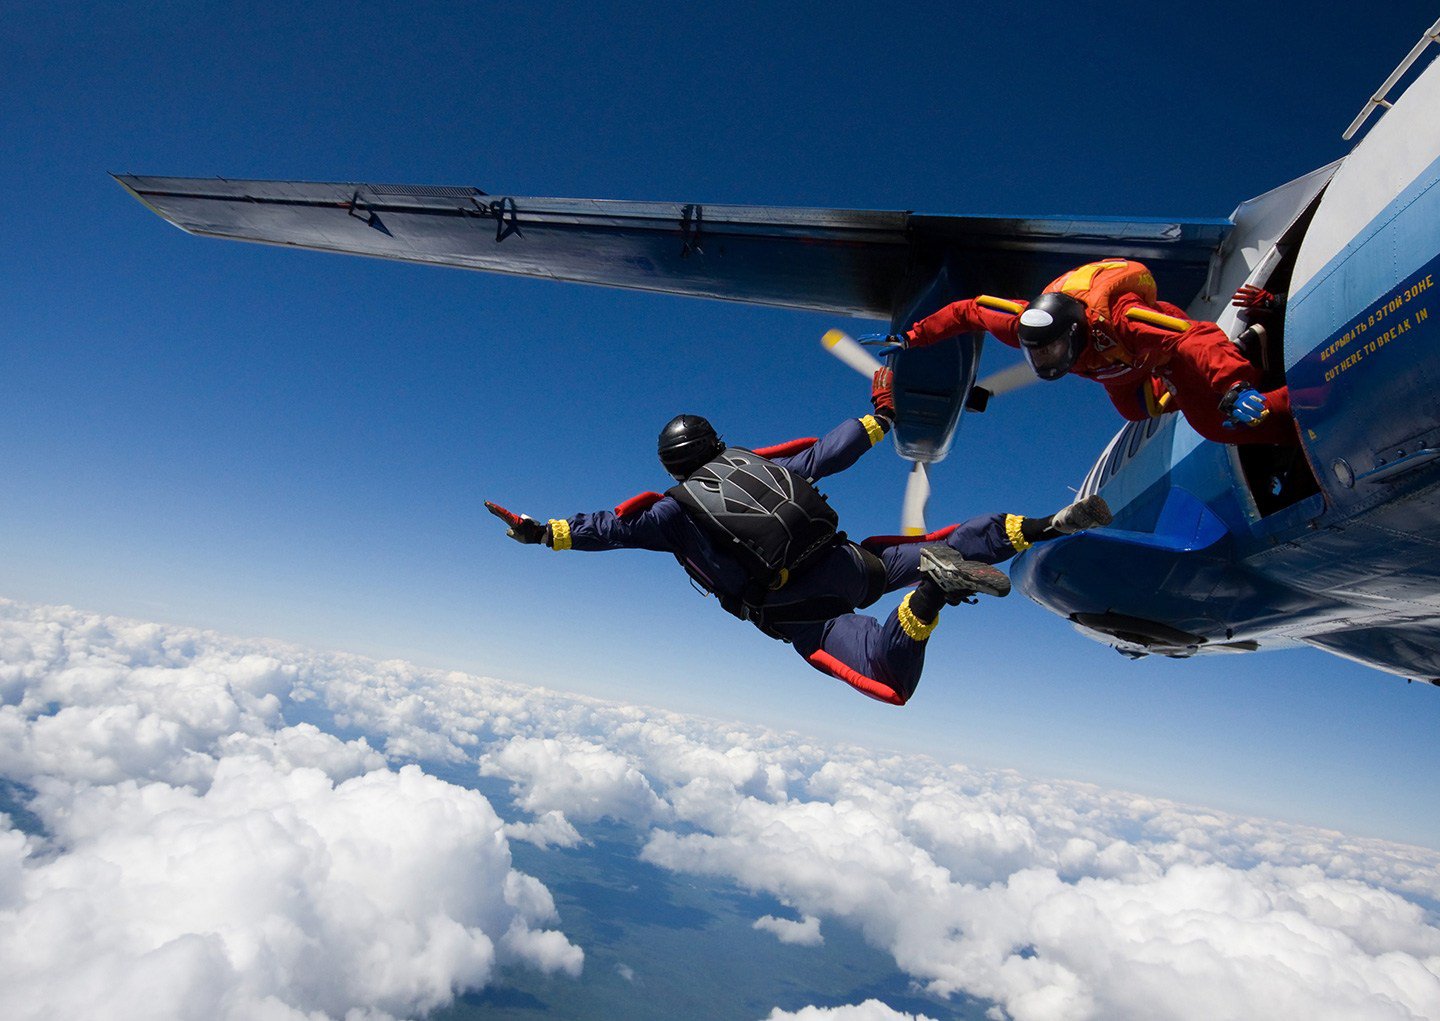 Skydiving Family Has More Than Quarter-Century of Experience